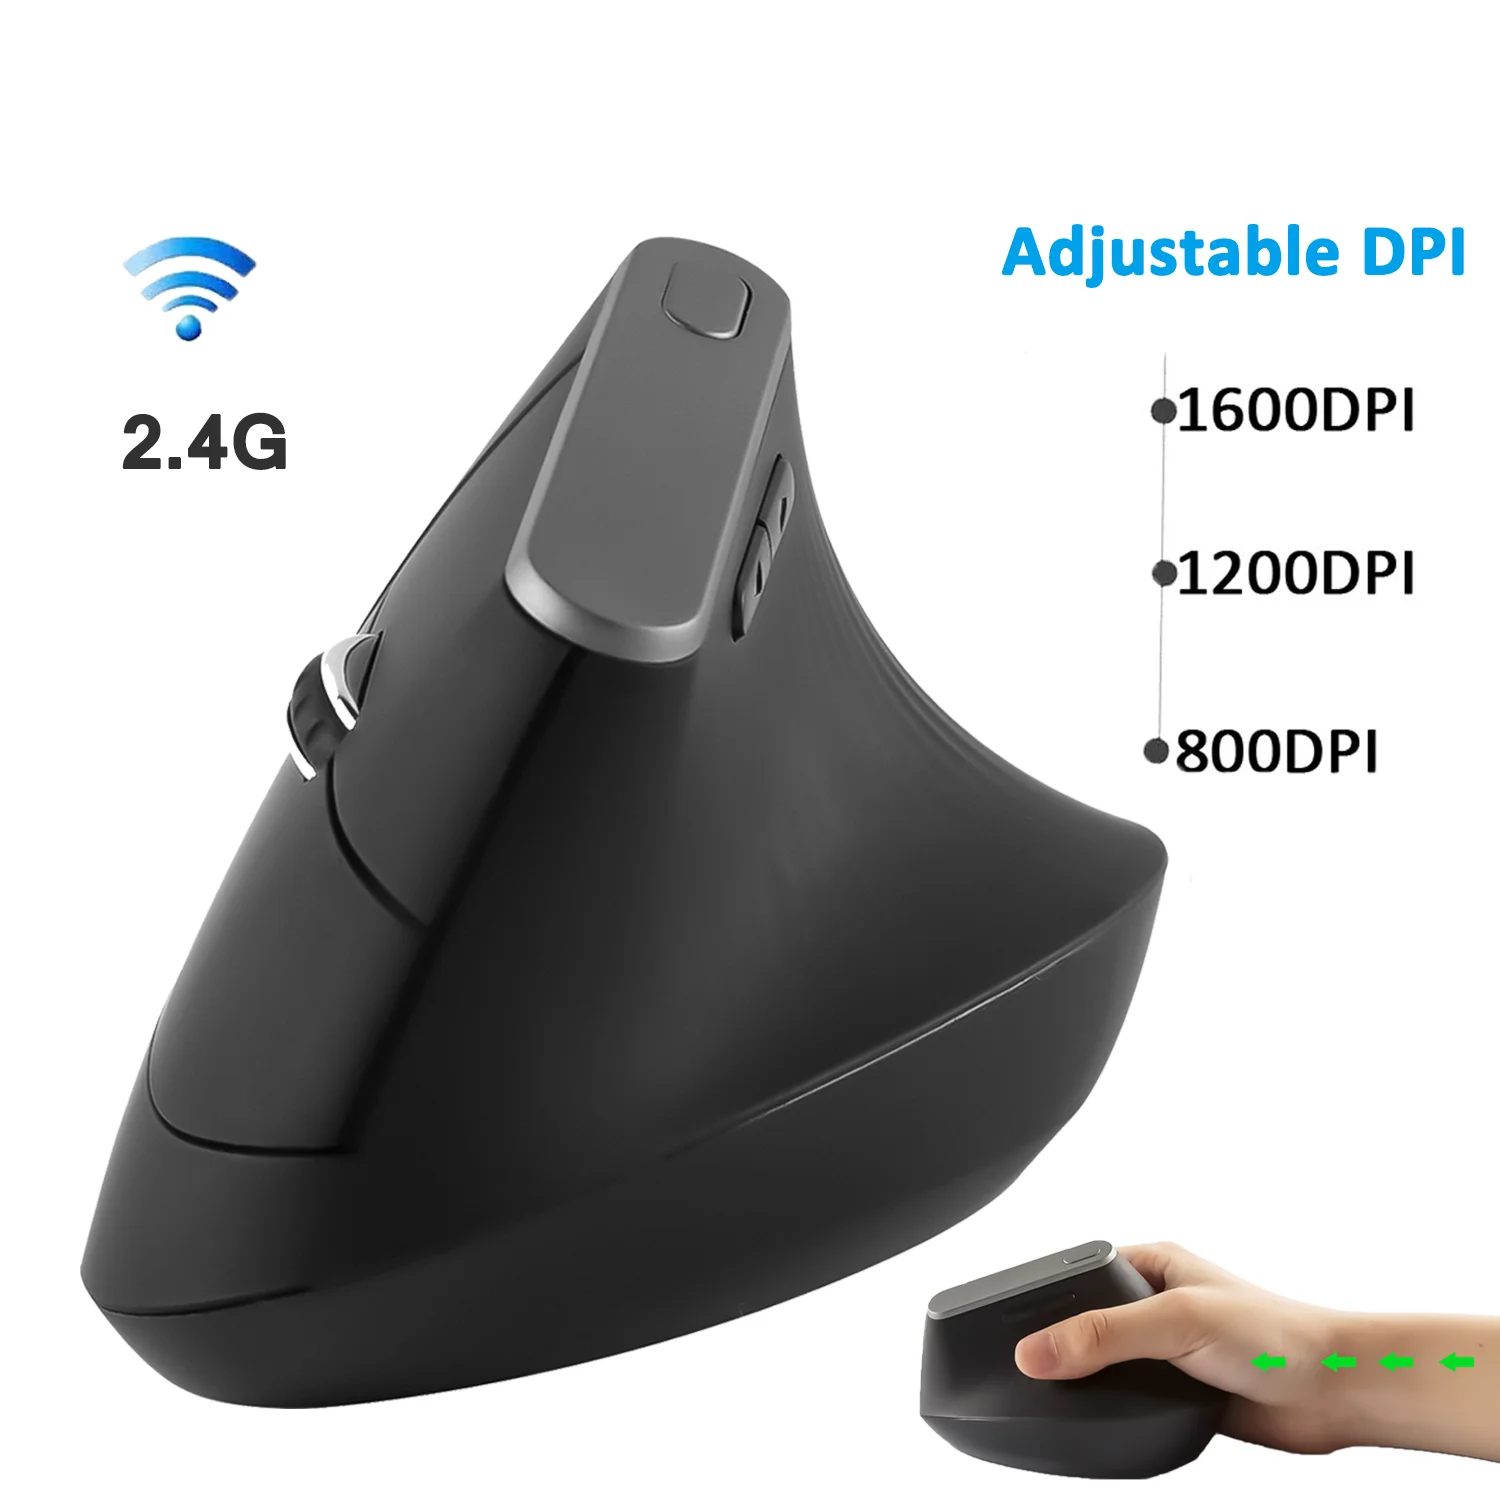 

Vertical Wireless Mouse Optical 800/1200/1600 DPI USB Mice Wrist Healthy Right Hand Mause 2.4G Ergonomic Office Mouse For Laptop